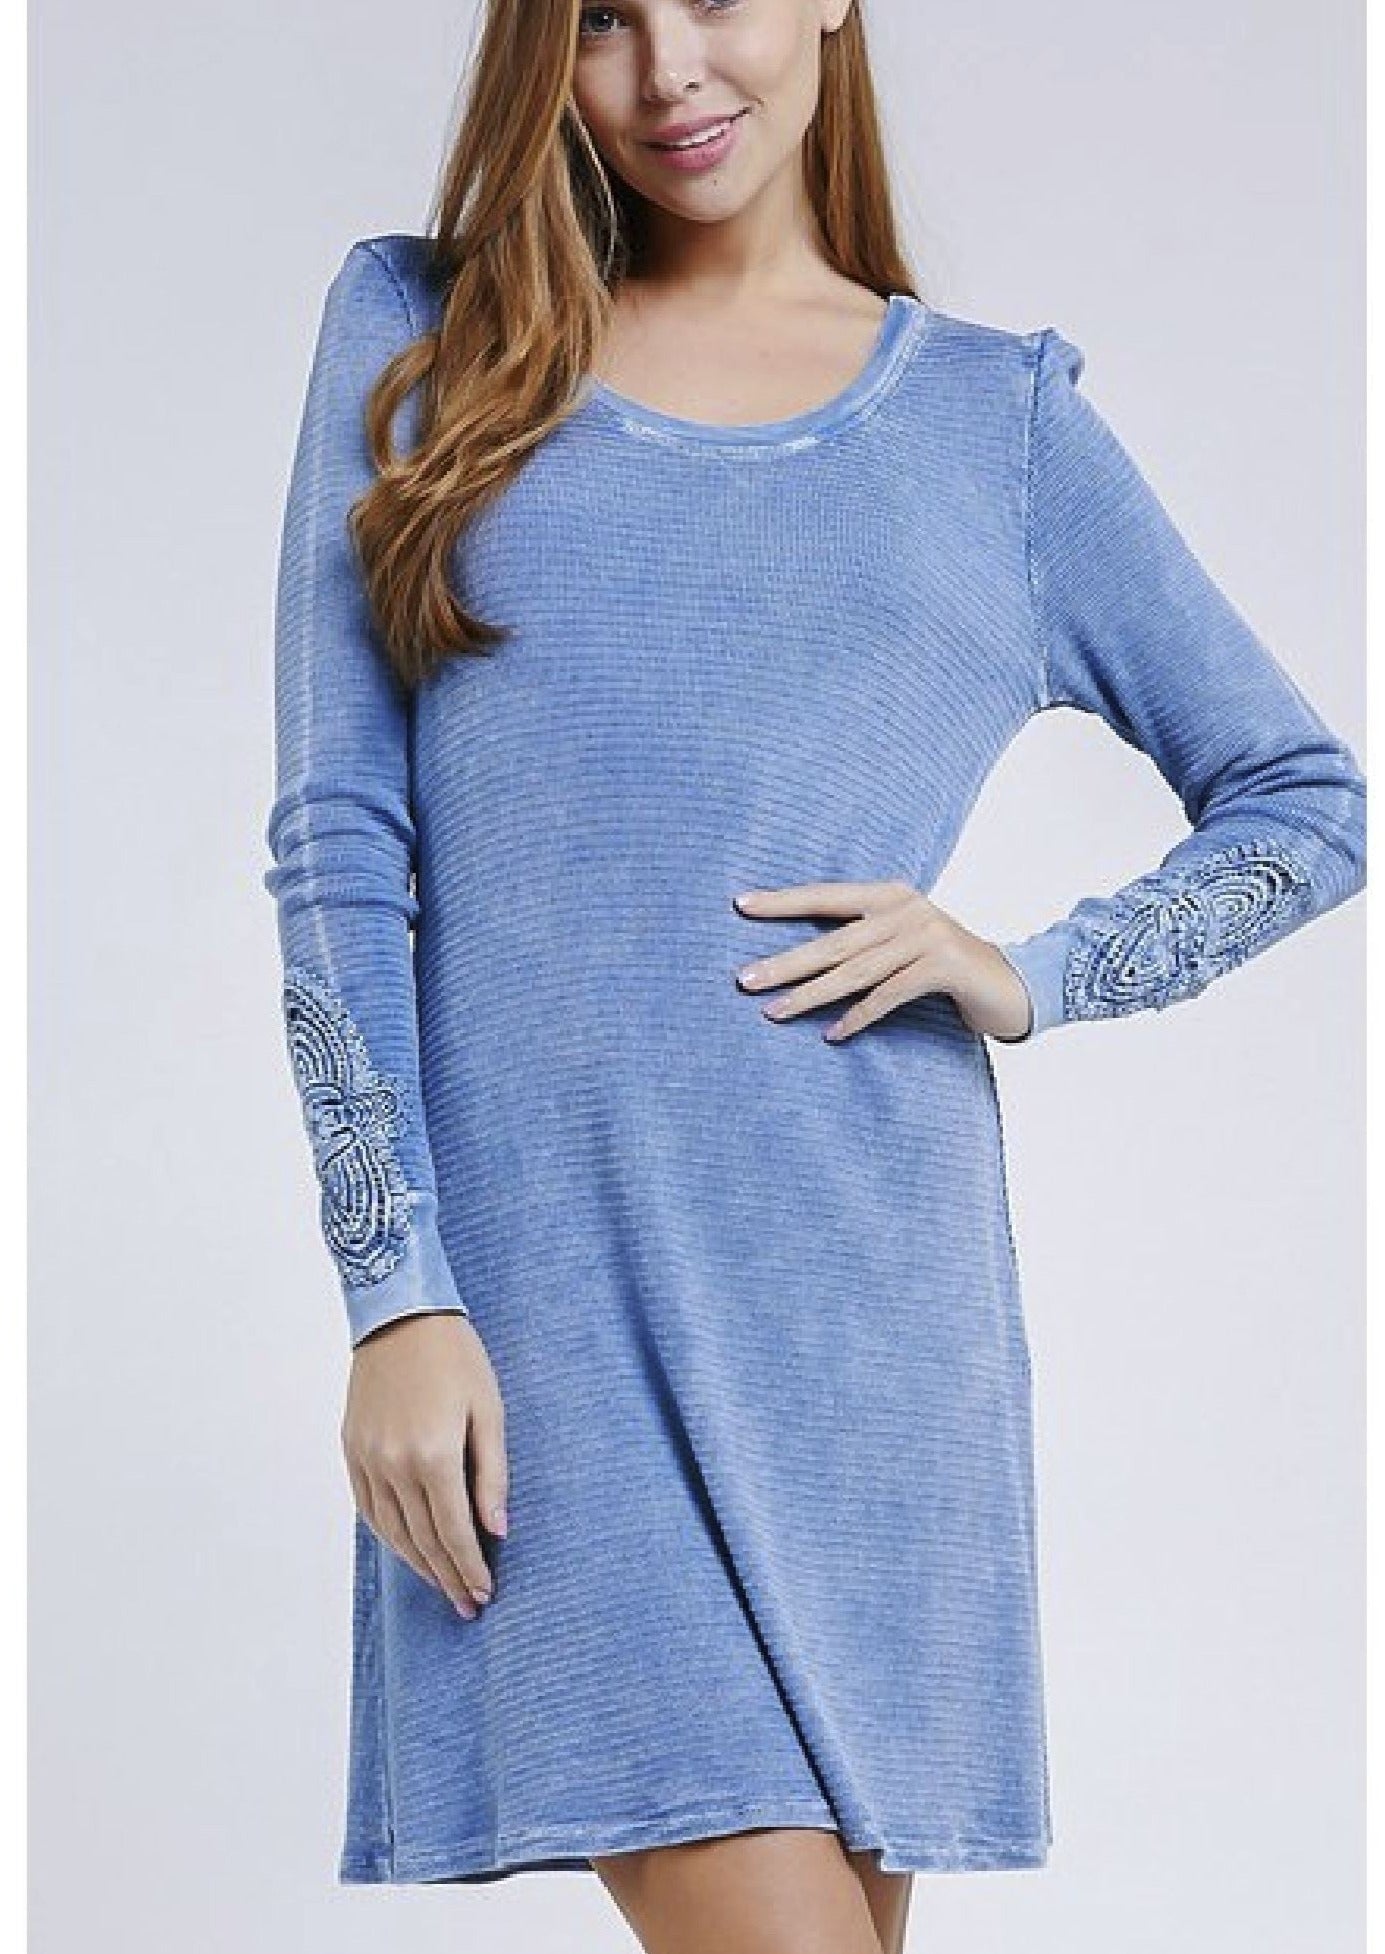 USA Made Ladies Vintage Textured Thermal Crochet Cuff Long Sleeve Cotton Blend Mini Dress in Chambray Blue | Classy Cozy Cool Women's Made in America Clothing Boutique